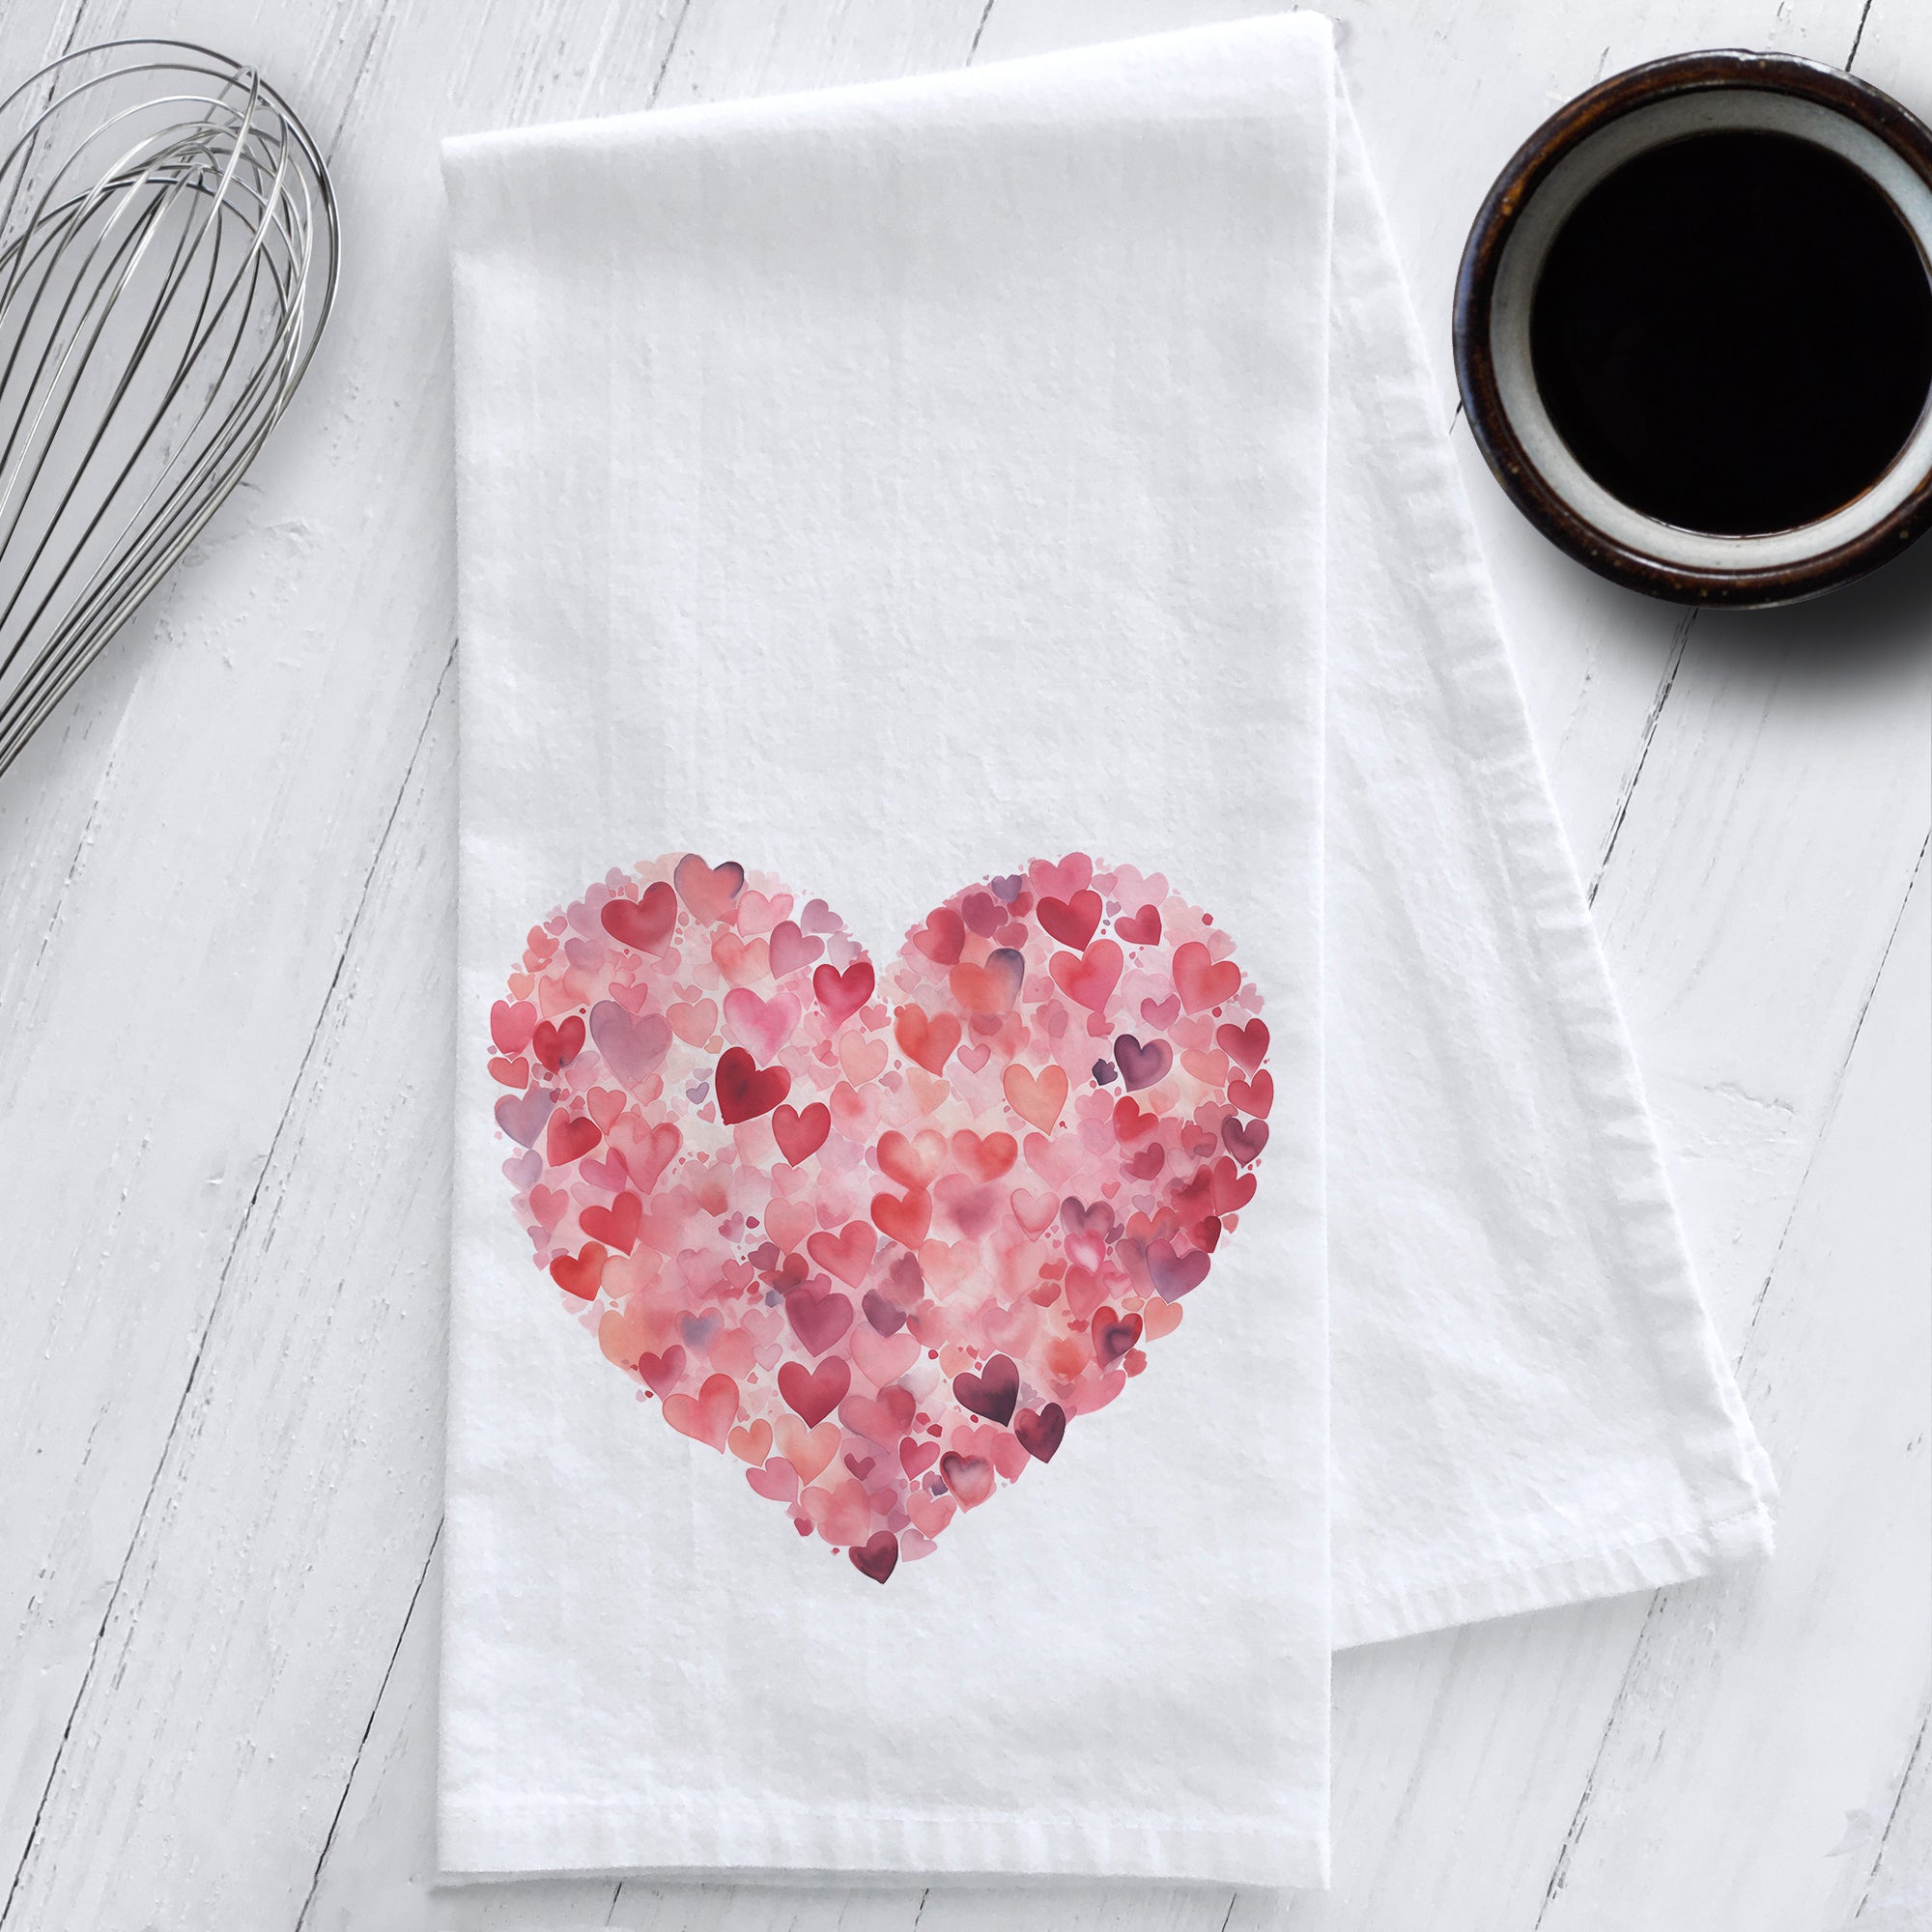 Hearts in a Heart Valentine's Day Tea Towel